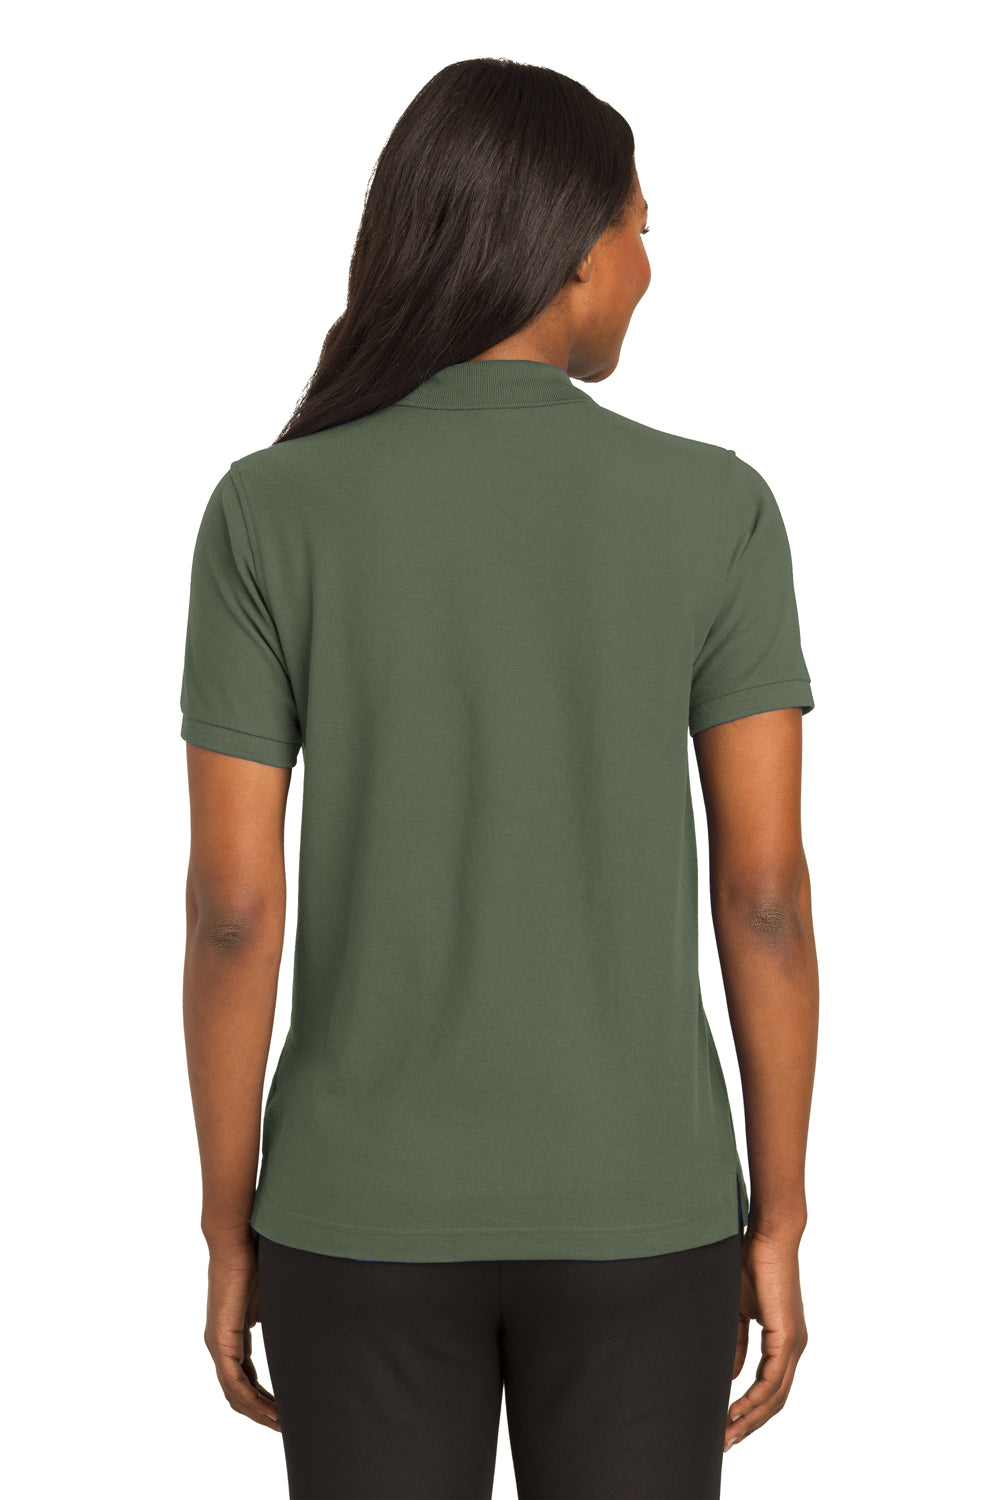 Port Authority L500 Womens Silk Touch Wrinkle Resistant Short Sleeve Polo Shirt Clover Green Back